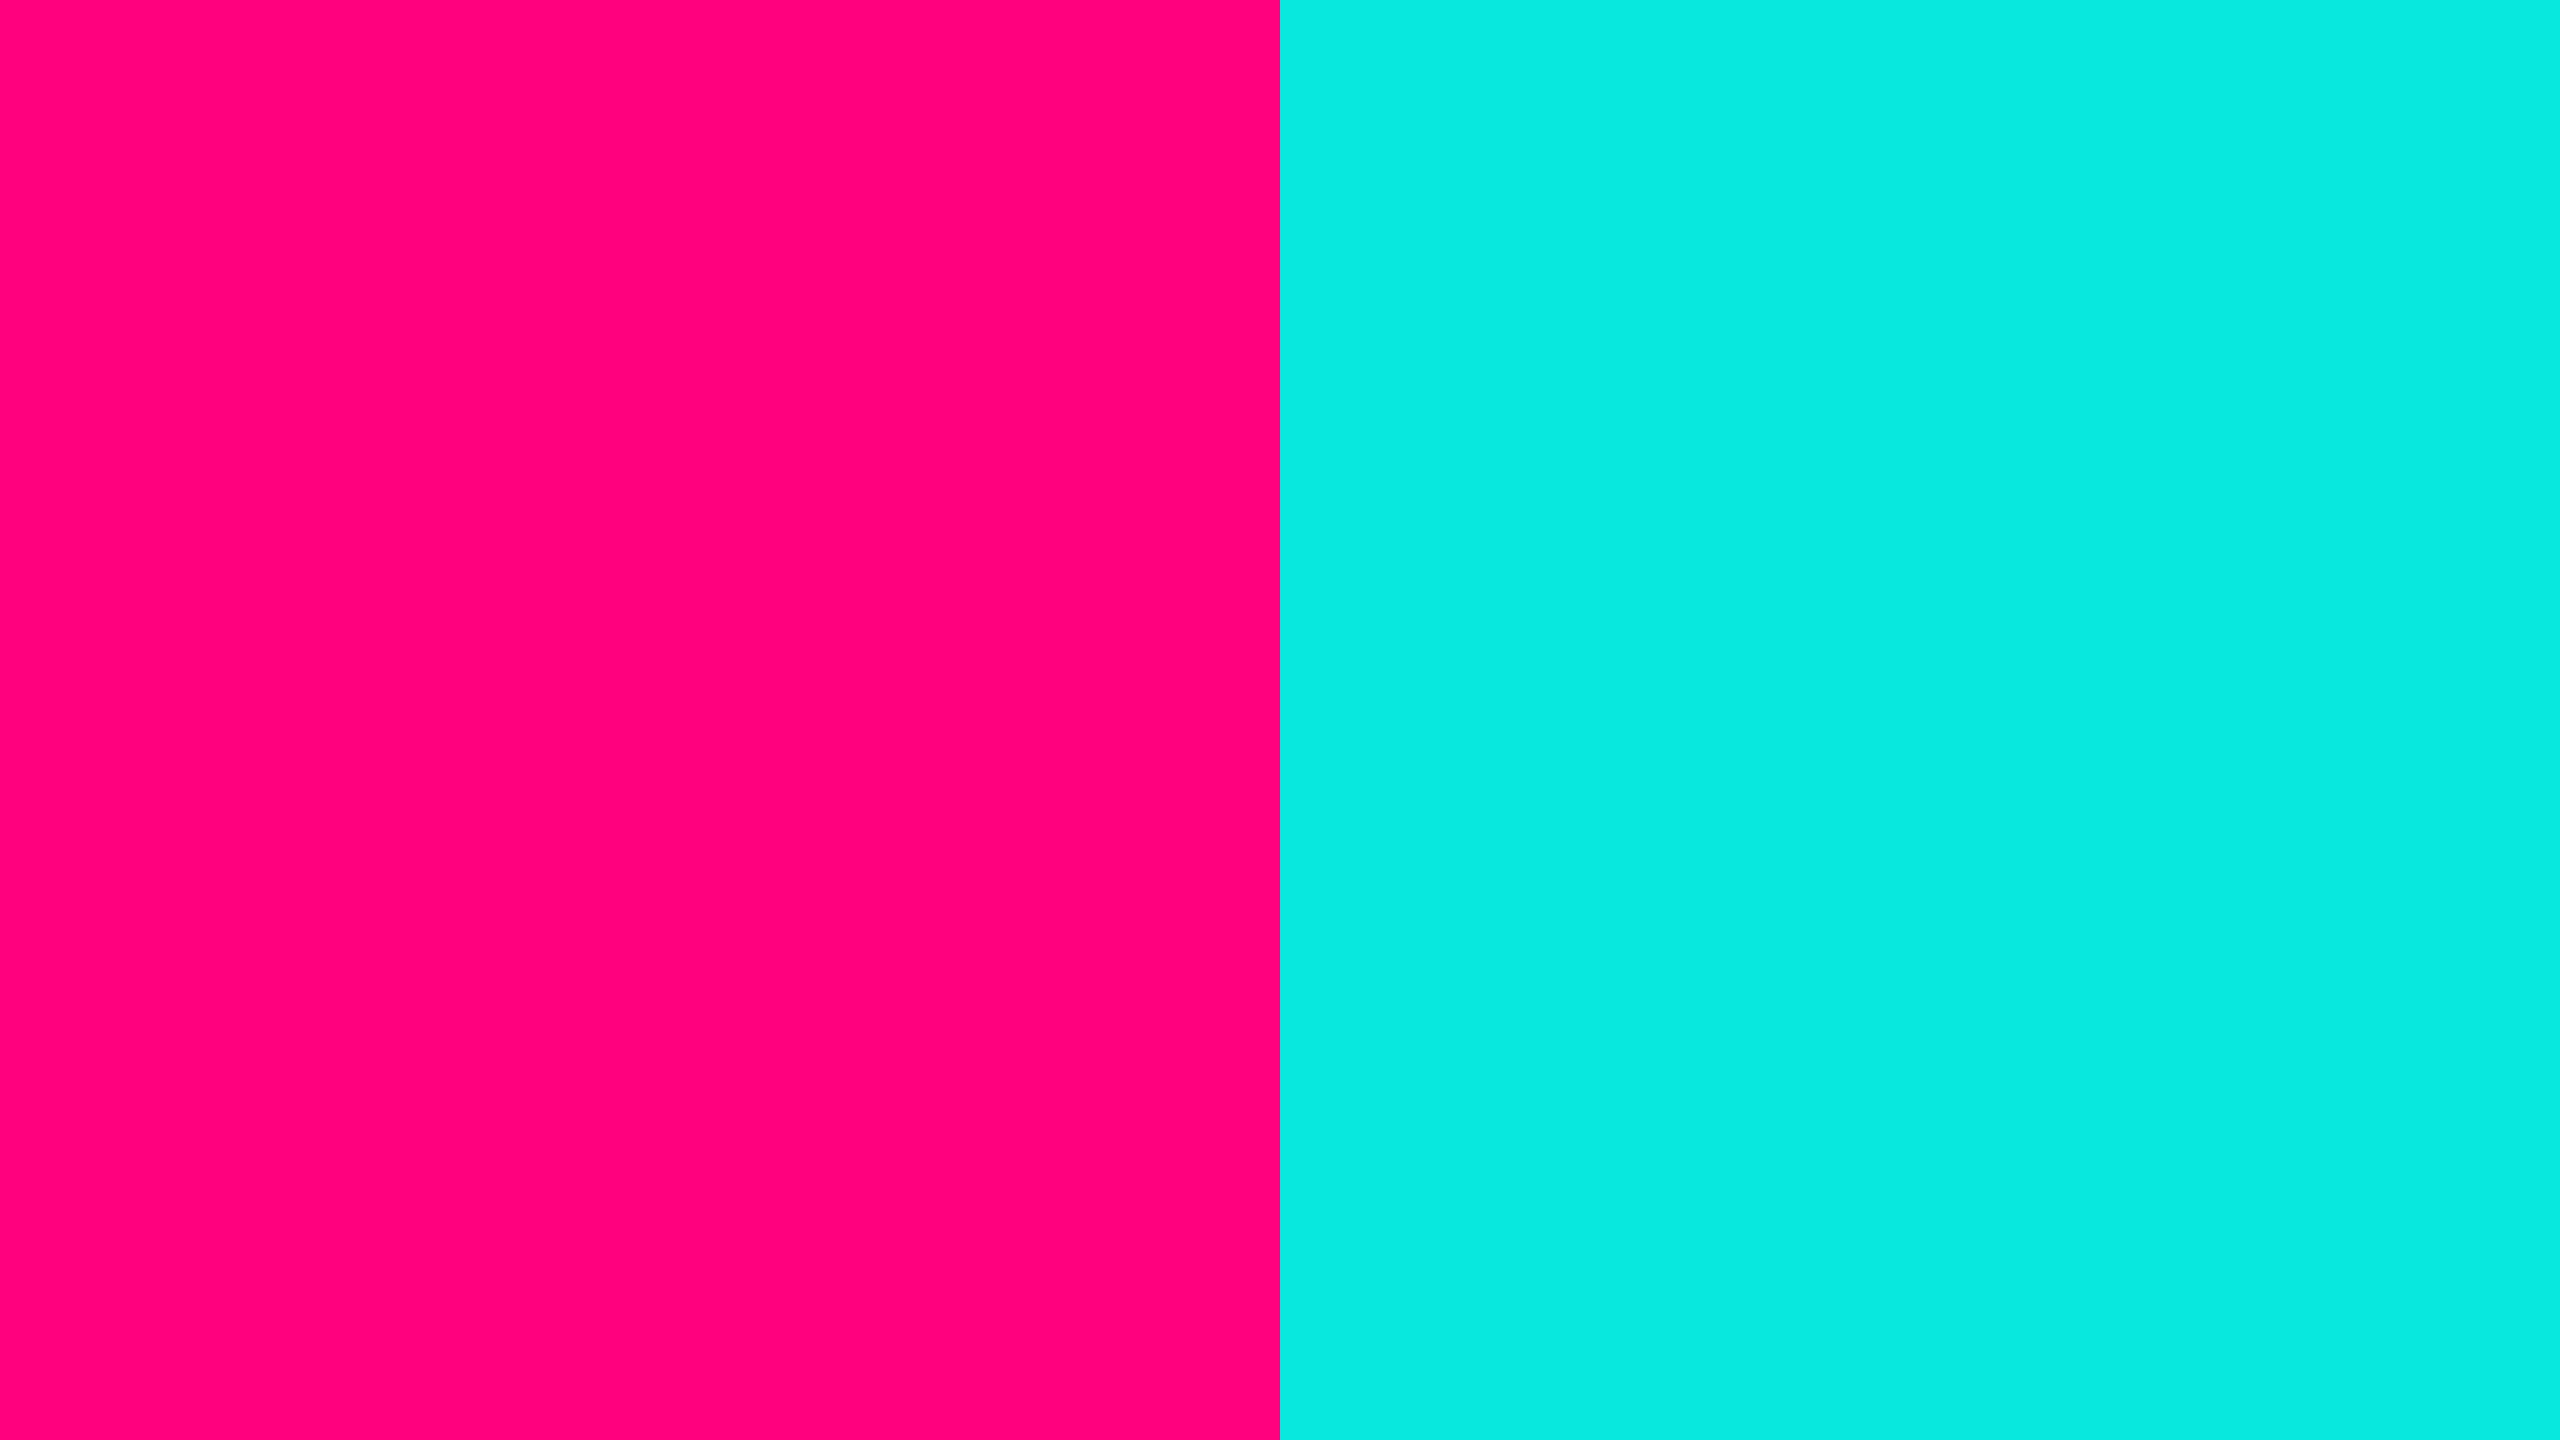 🔥 Download Resolution Bright Pink And Turquoise Solid Two Color Background By Ericab27 Bright